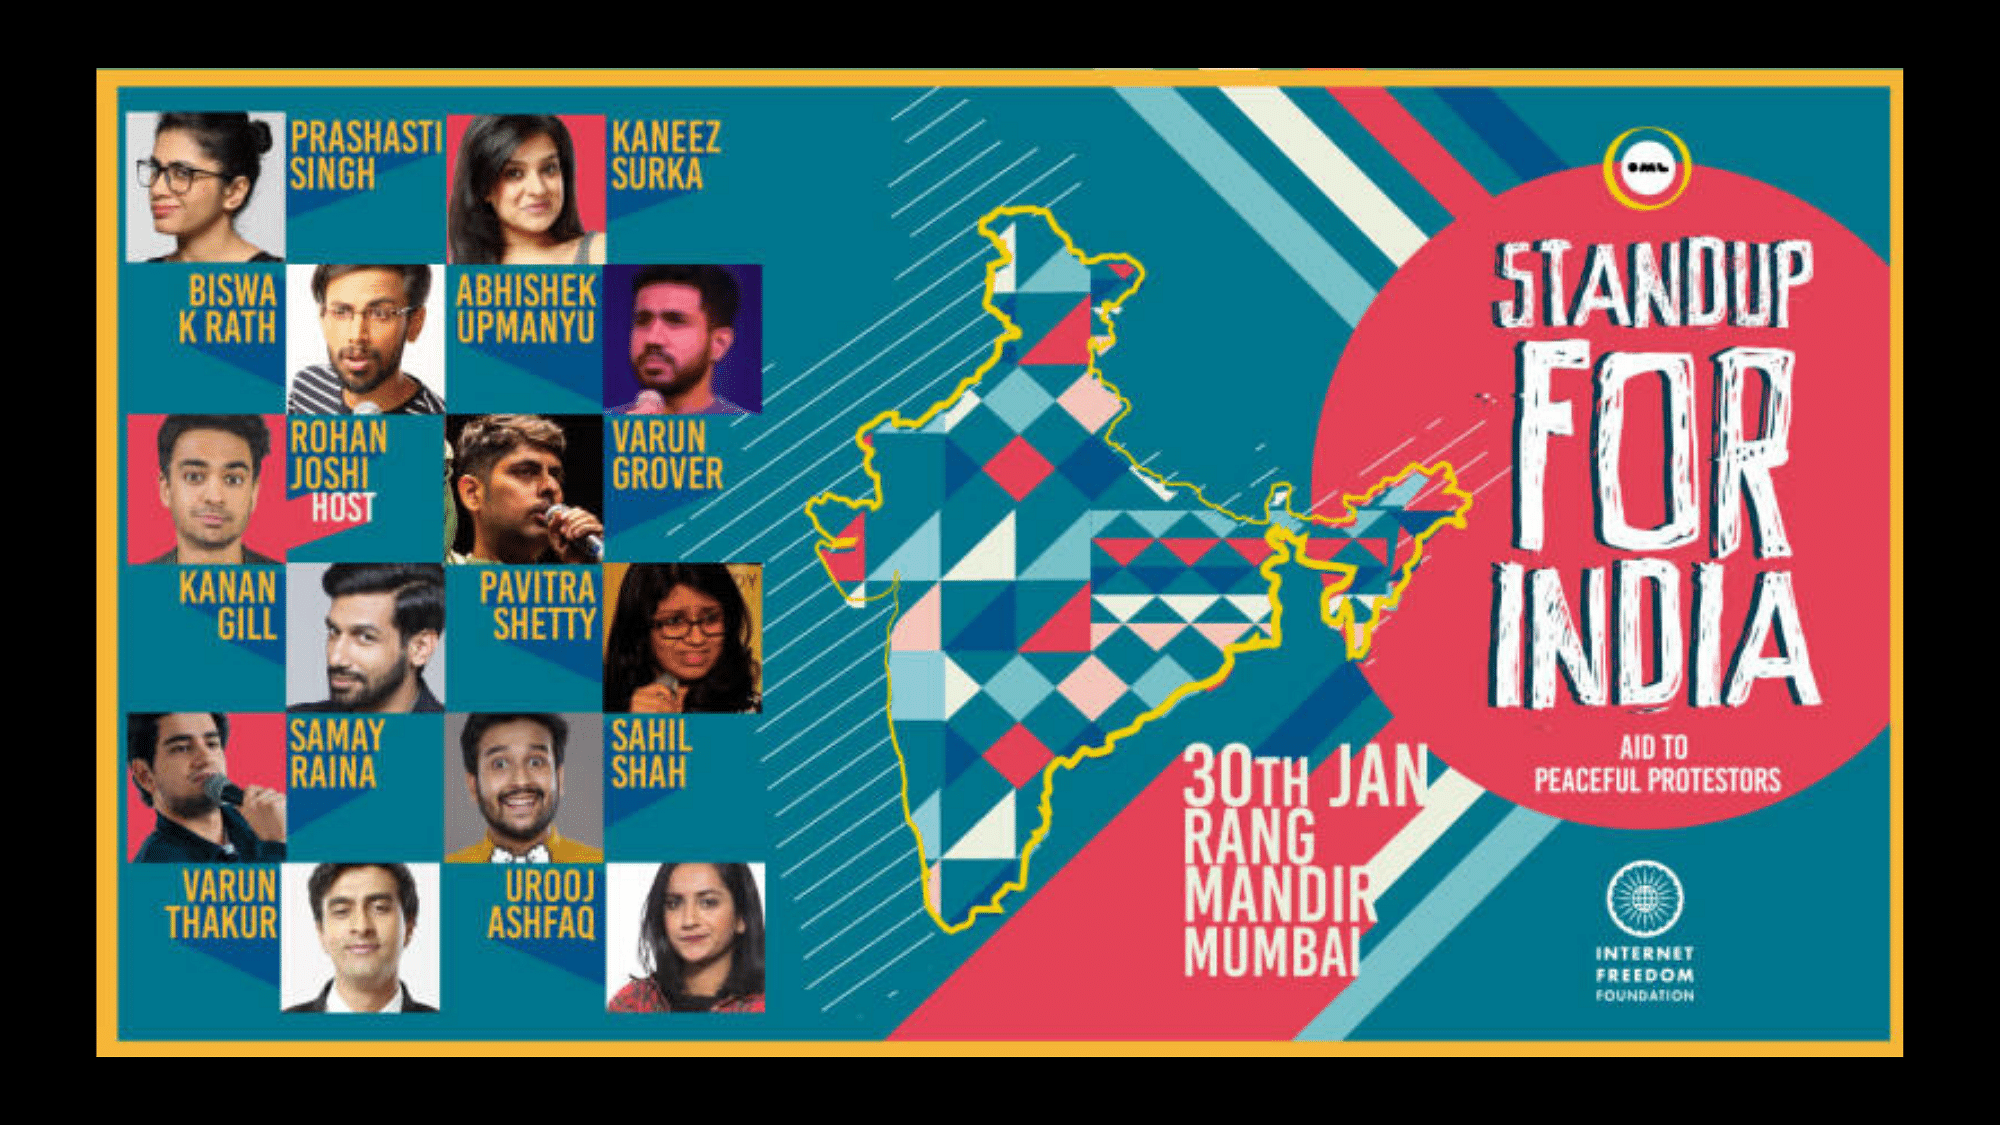 A dozen of India’s top comedians are going to be performing at a fundraiser show in Mumbai on 30 January.